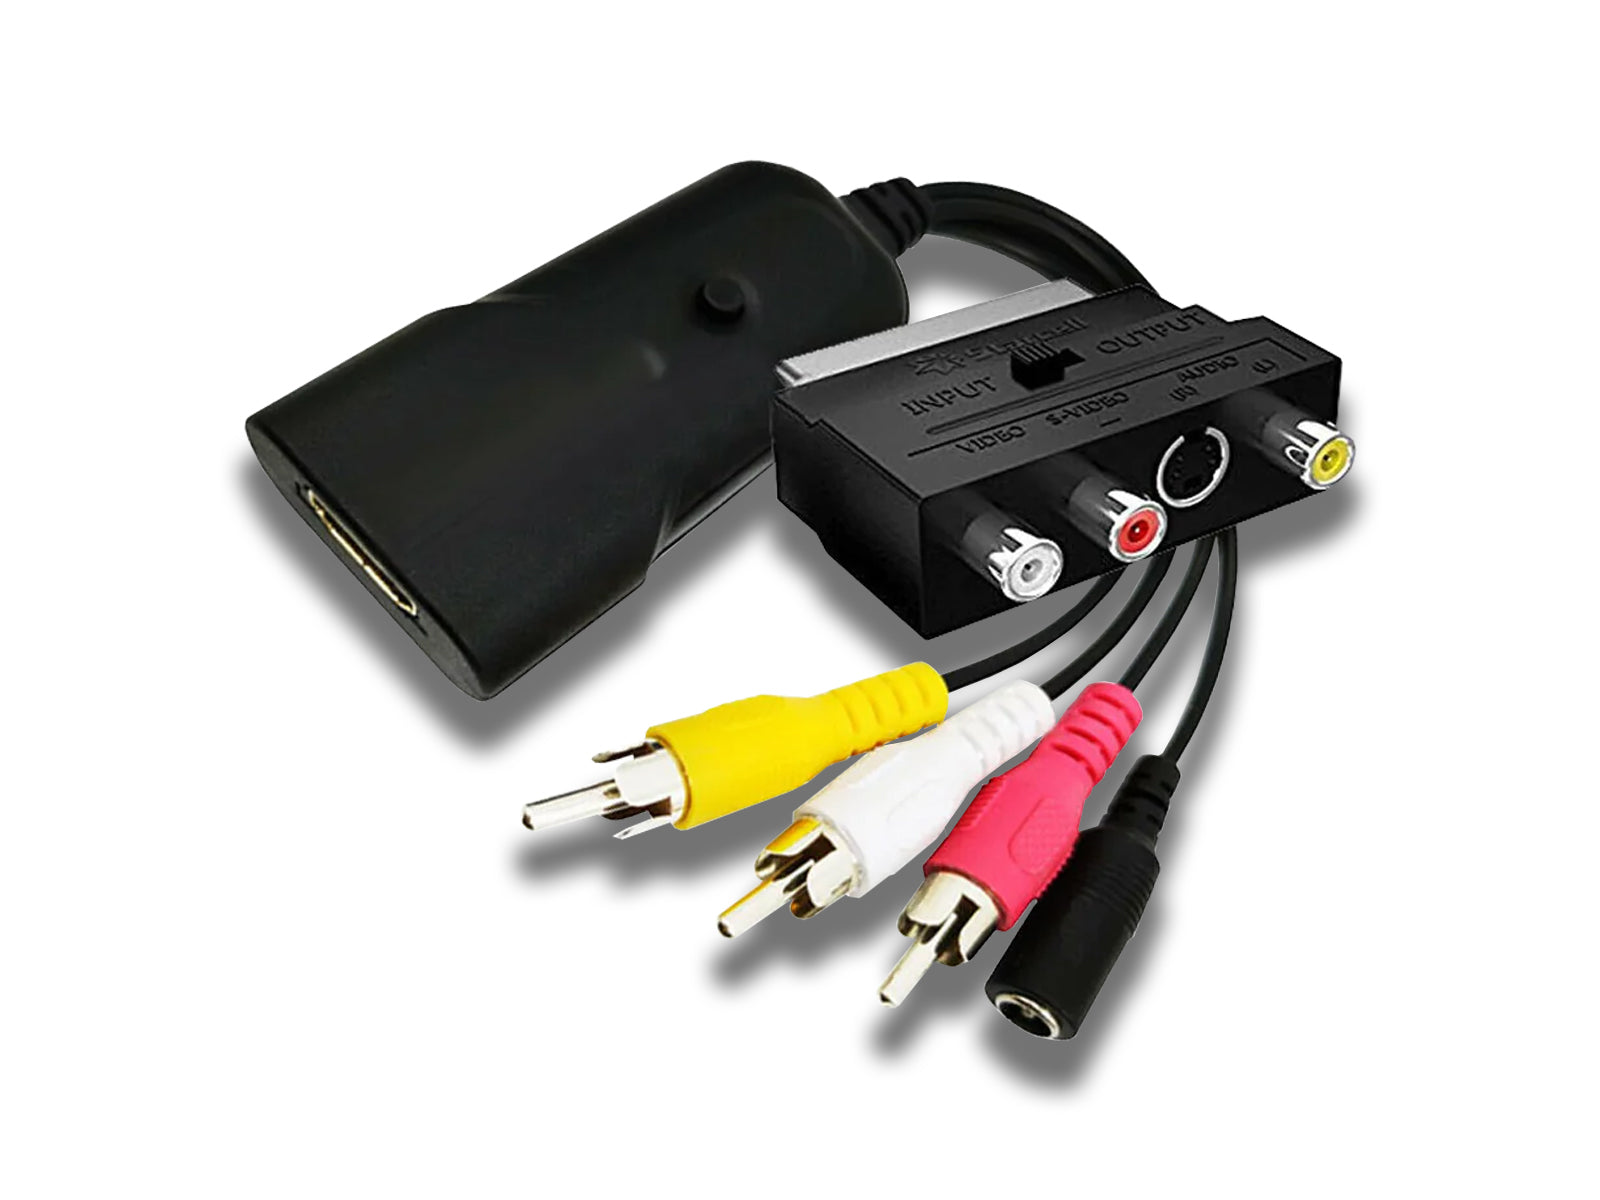 Image-of-the-hdmi-to-scart-converter-on-the-white-background